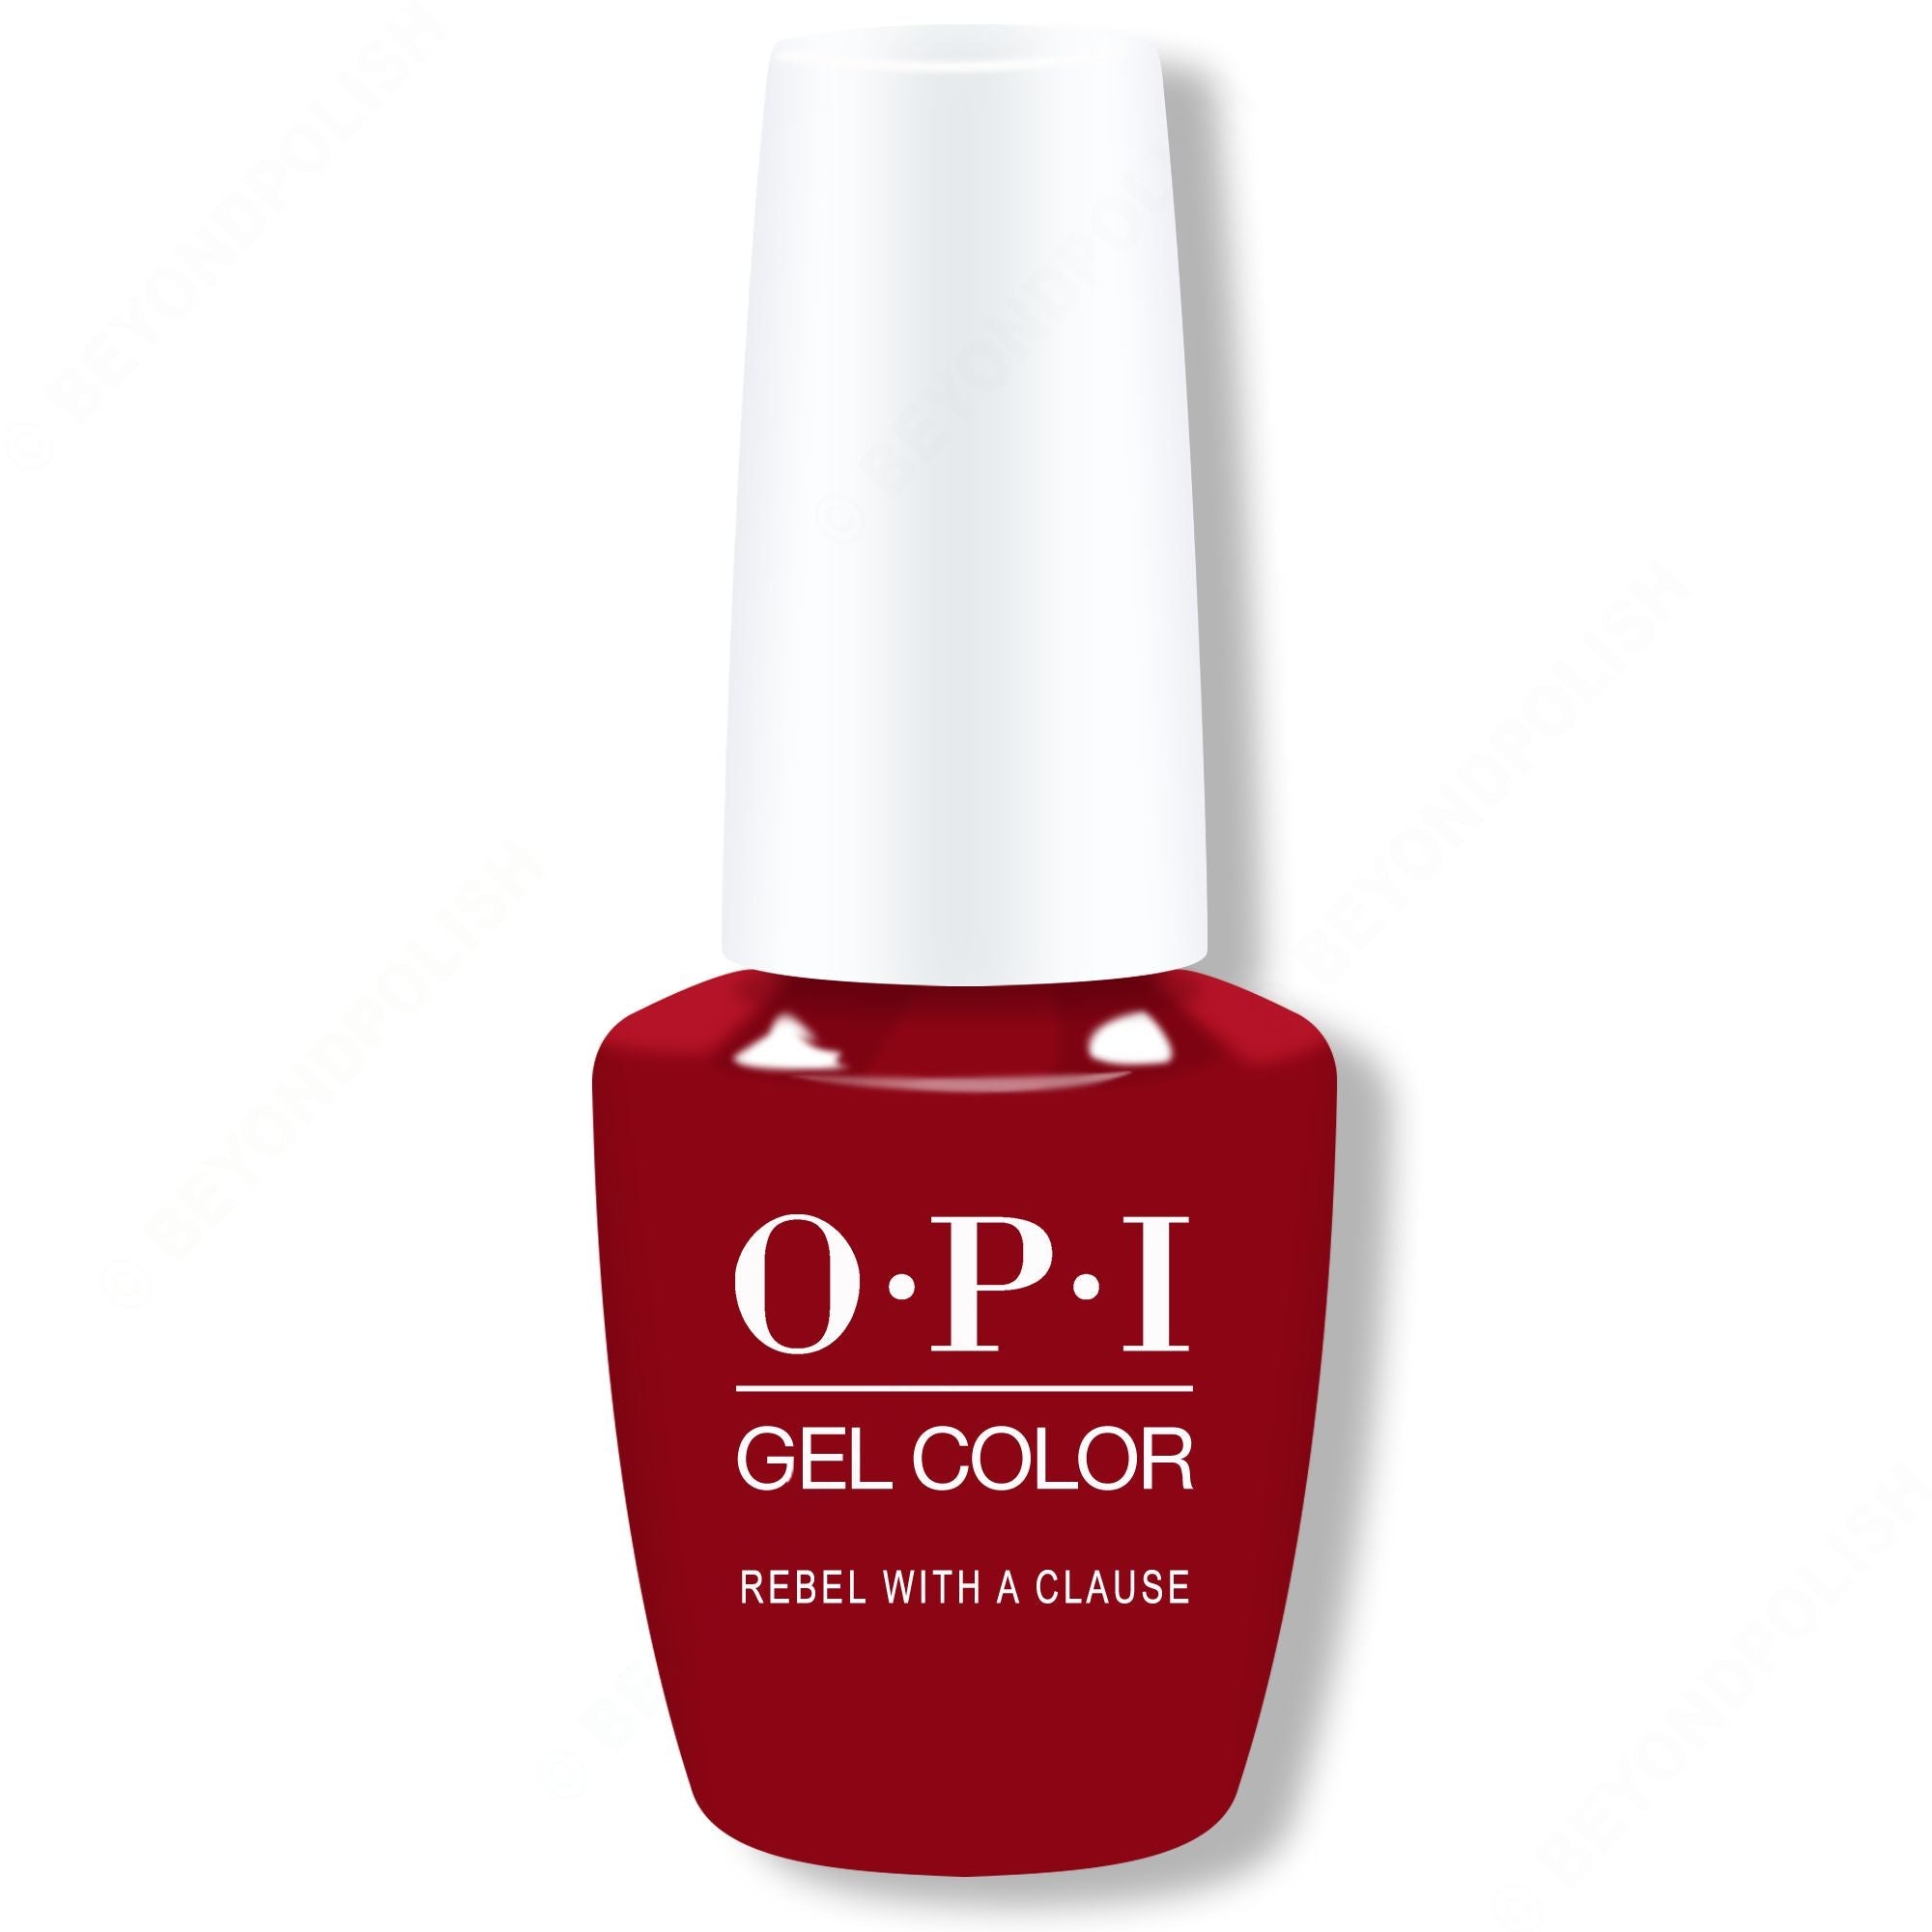 OPI Gel Color - Rebel With A Clause 0.5 oz - #GCHPQ05